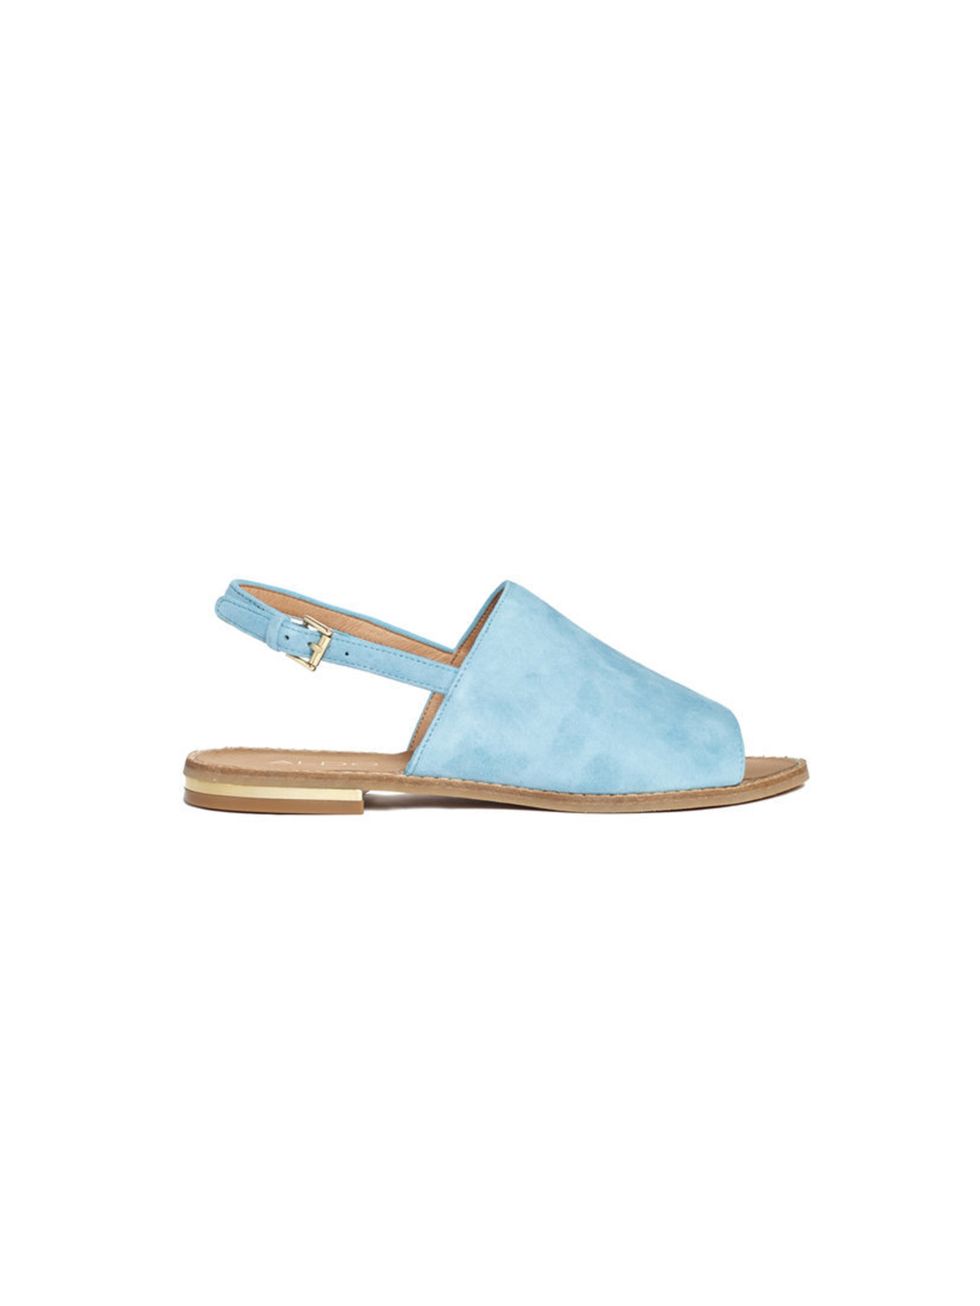 <p>Just slip them on, and slide right on down to the beach.</p><p>Aldo slides, £50, from <a href="http://www.asos.com/ALDO/ALDO-Cassica-Light-Blue-Flat-Sandals/Prod/pgeproduct.aspx?iid=3898075&amp;SearchQuery=aldo%20sandal&amp;sh=0&amp;pge=0&amp;pgesize=3